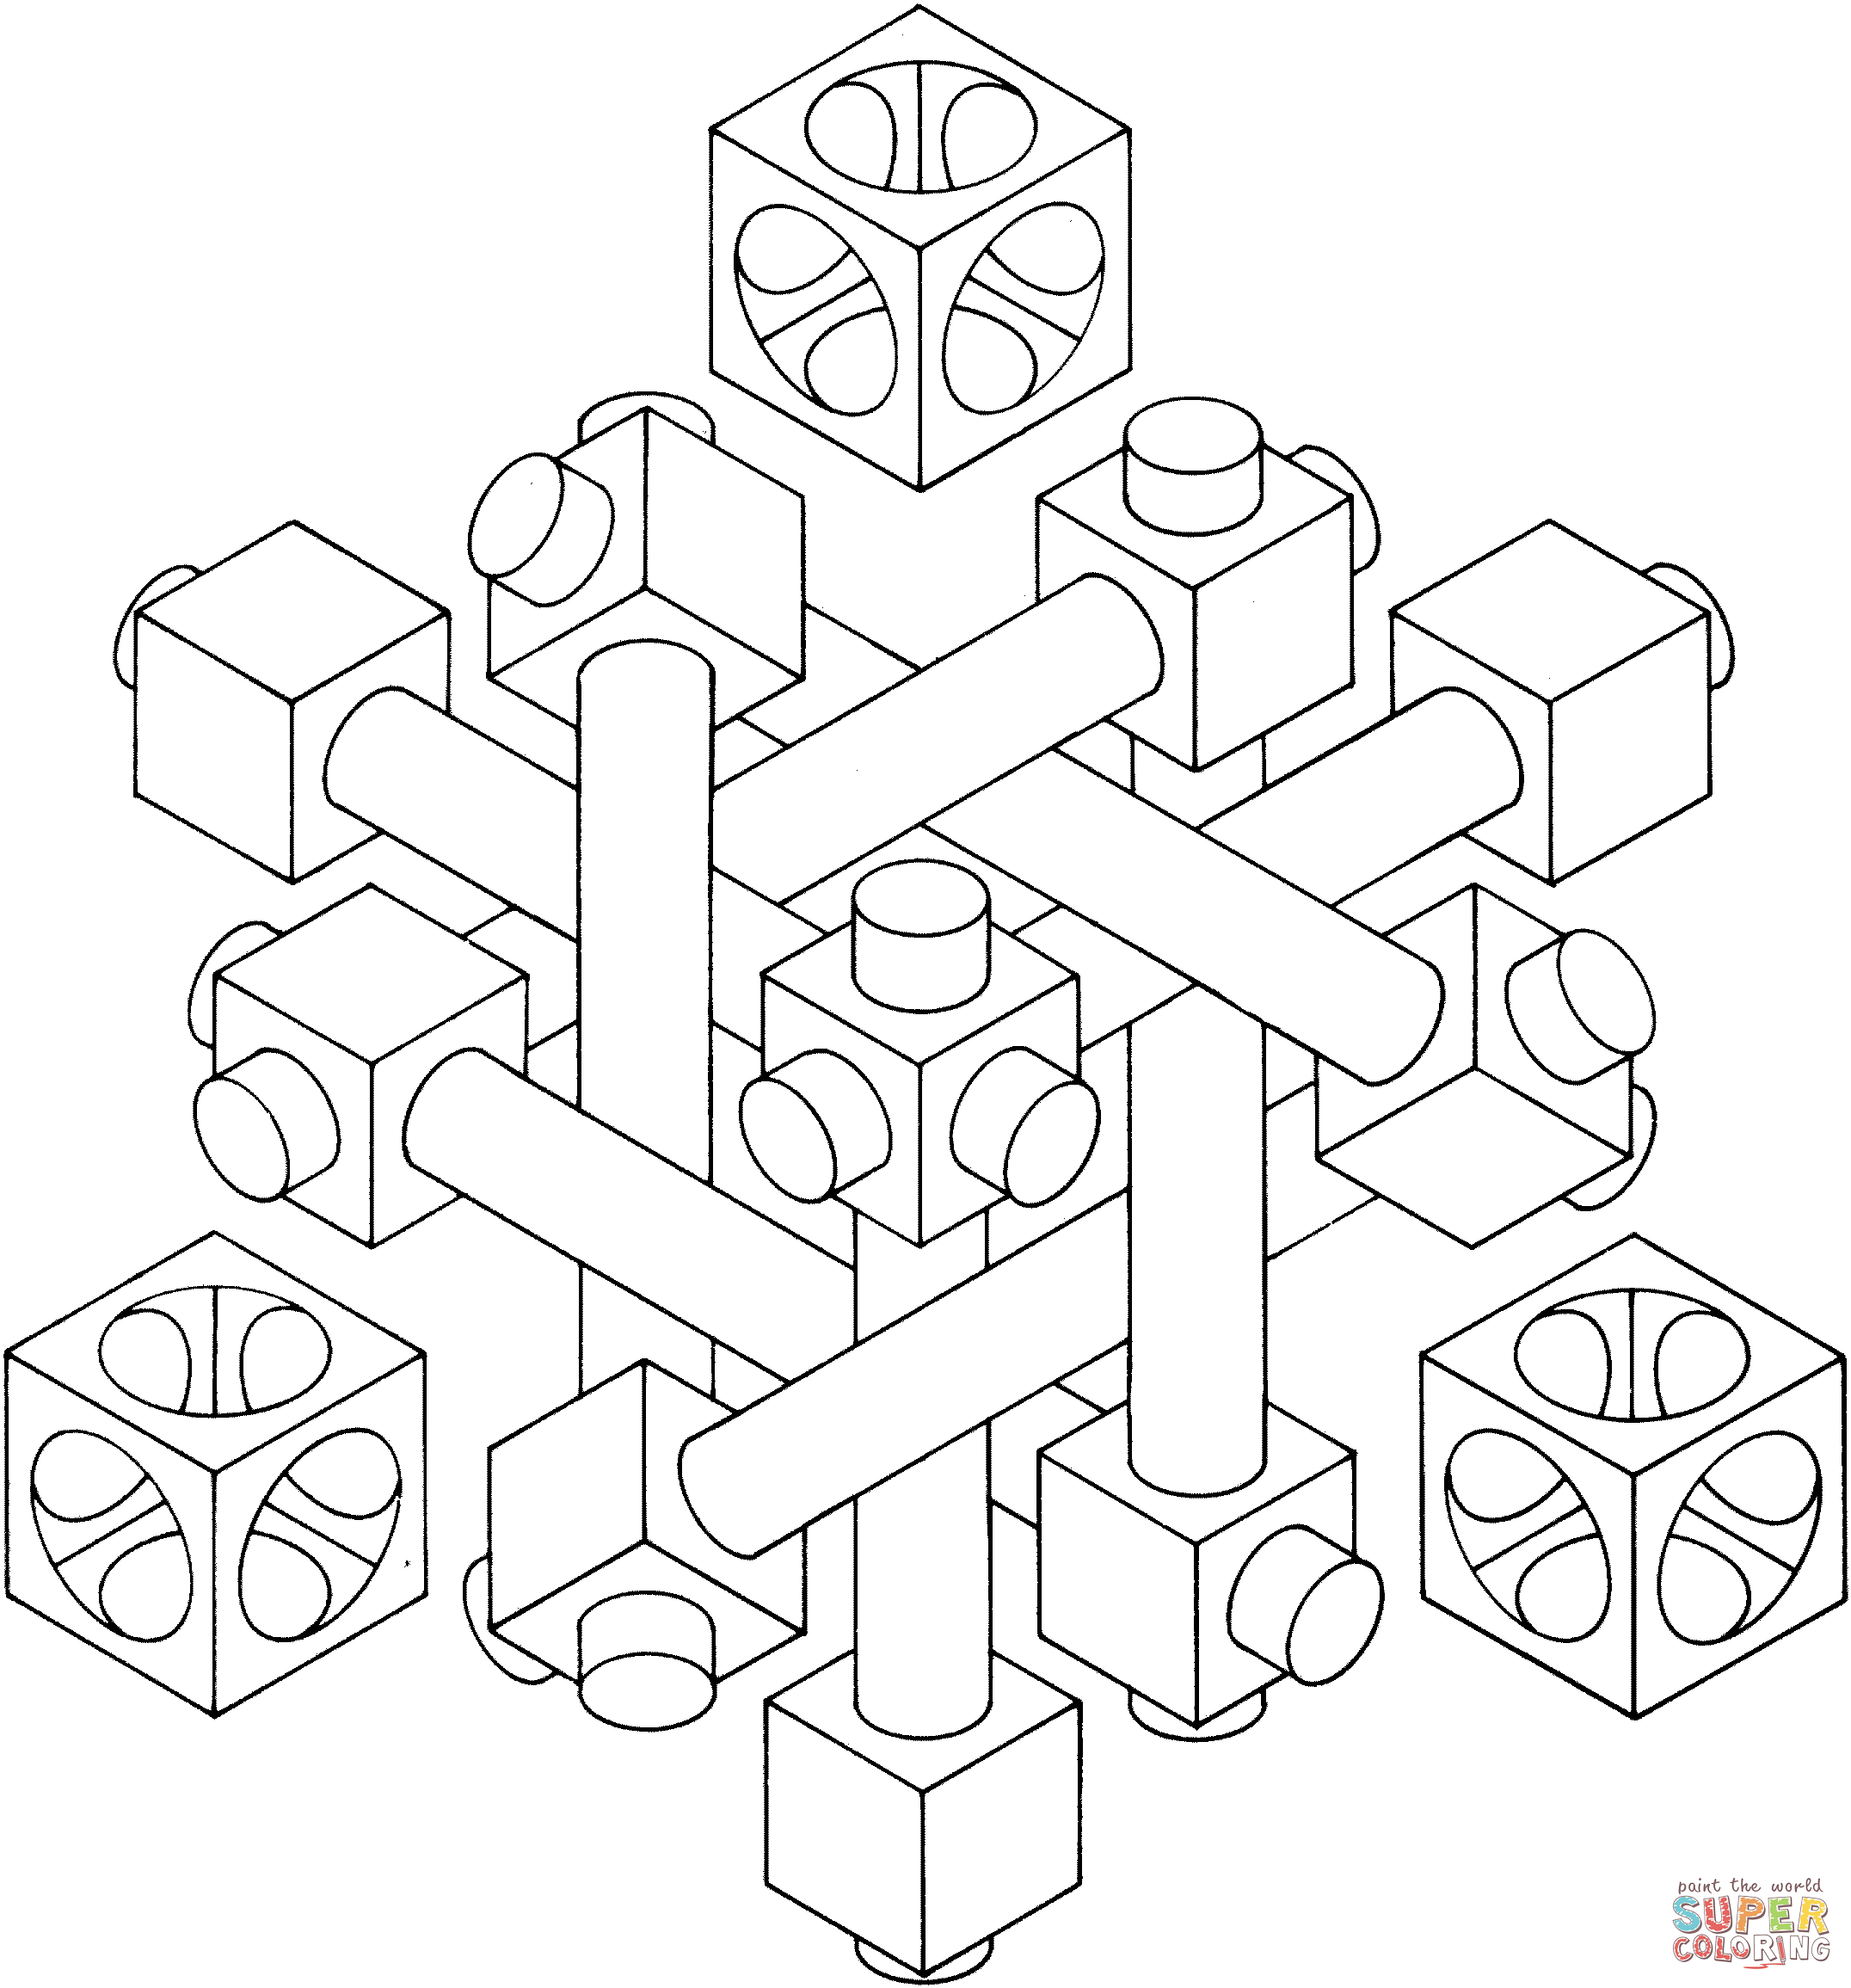 Optical Illusion 27 coloring page | Free Printable Coloring Pages